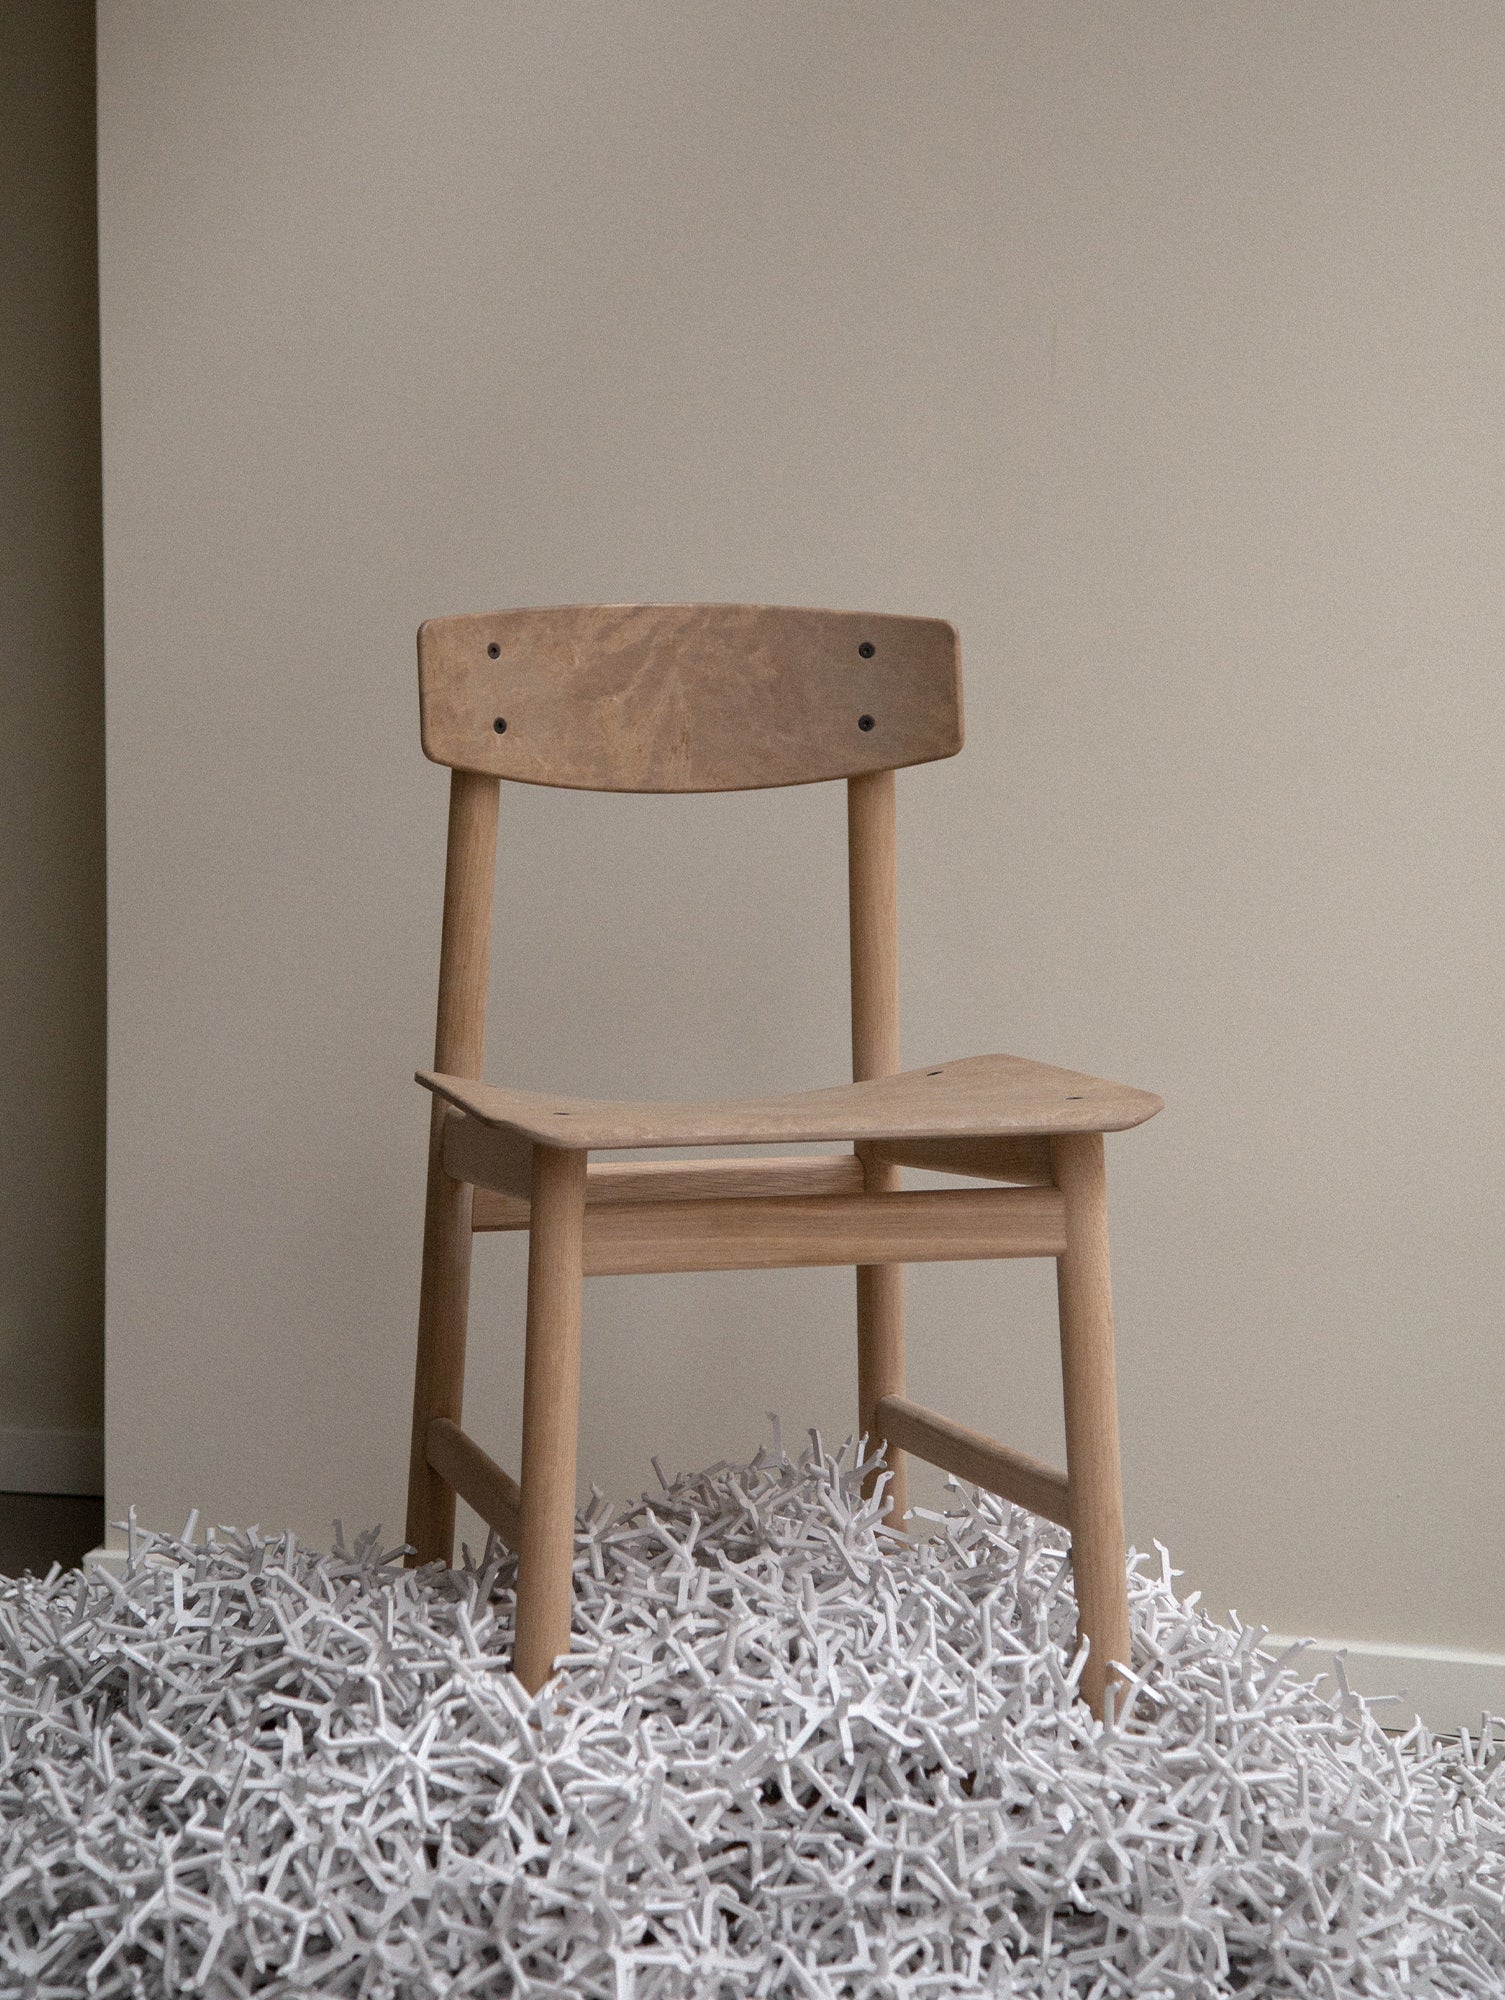 Conscious Chair 3162 by Mater - Soaped Oak / Coffee Waste Light